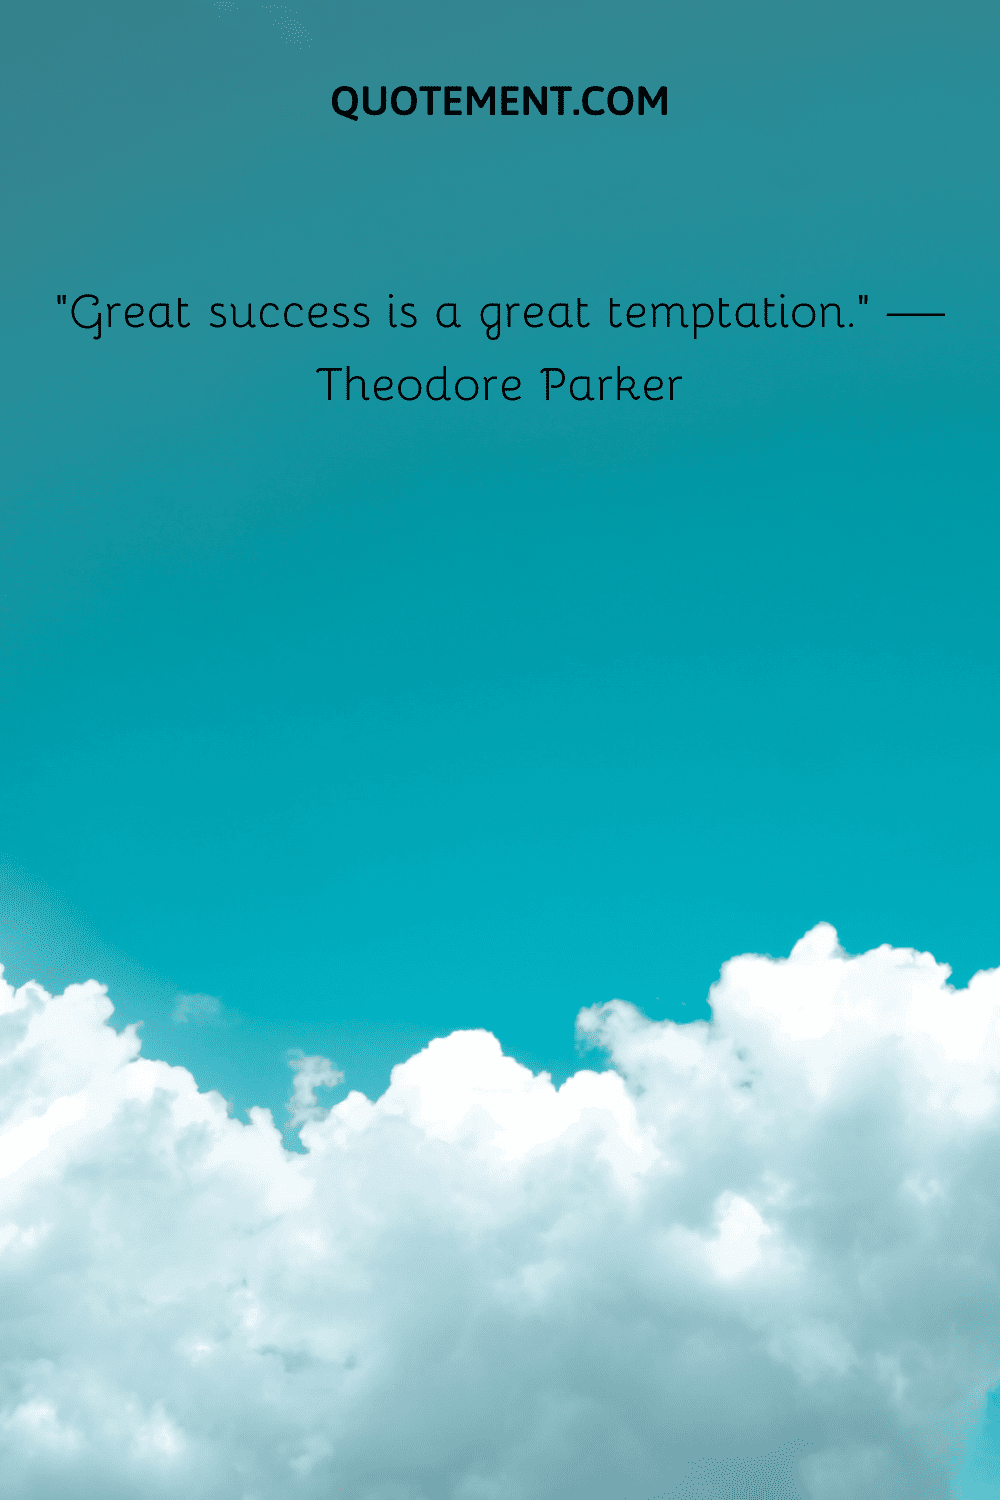 Great success is a great temptation